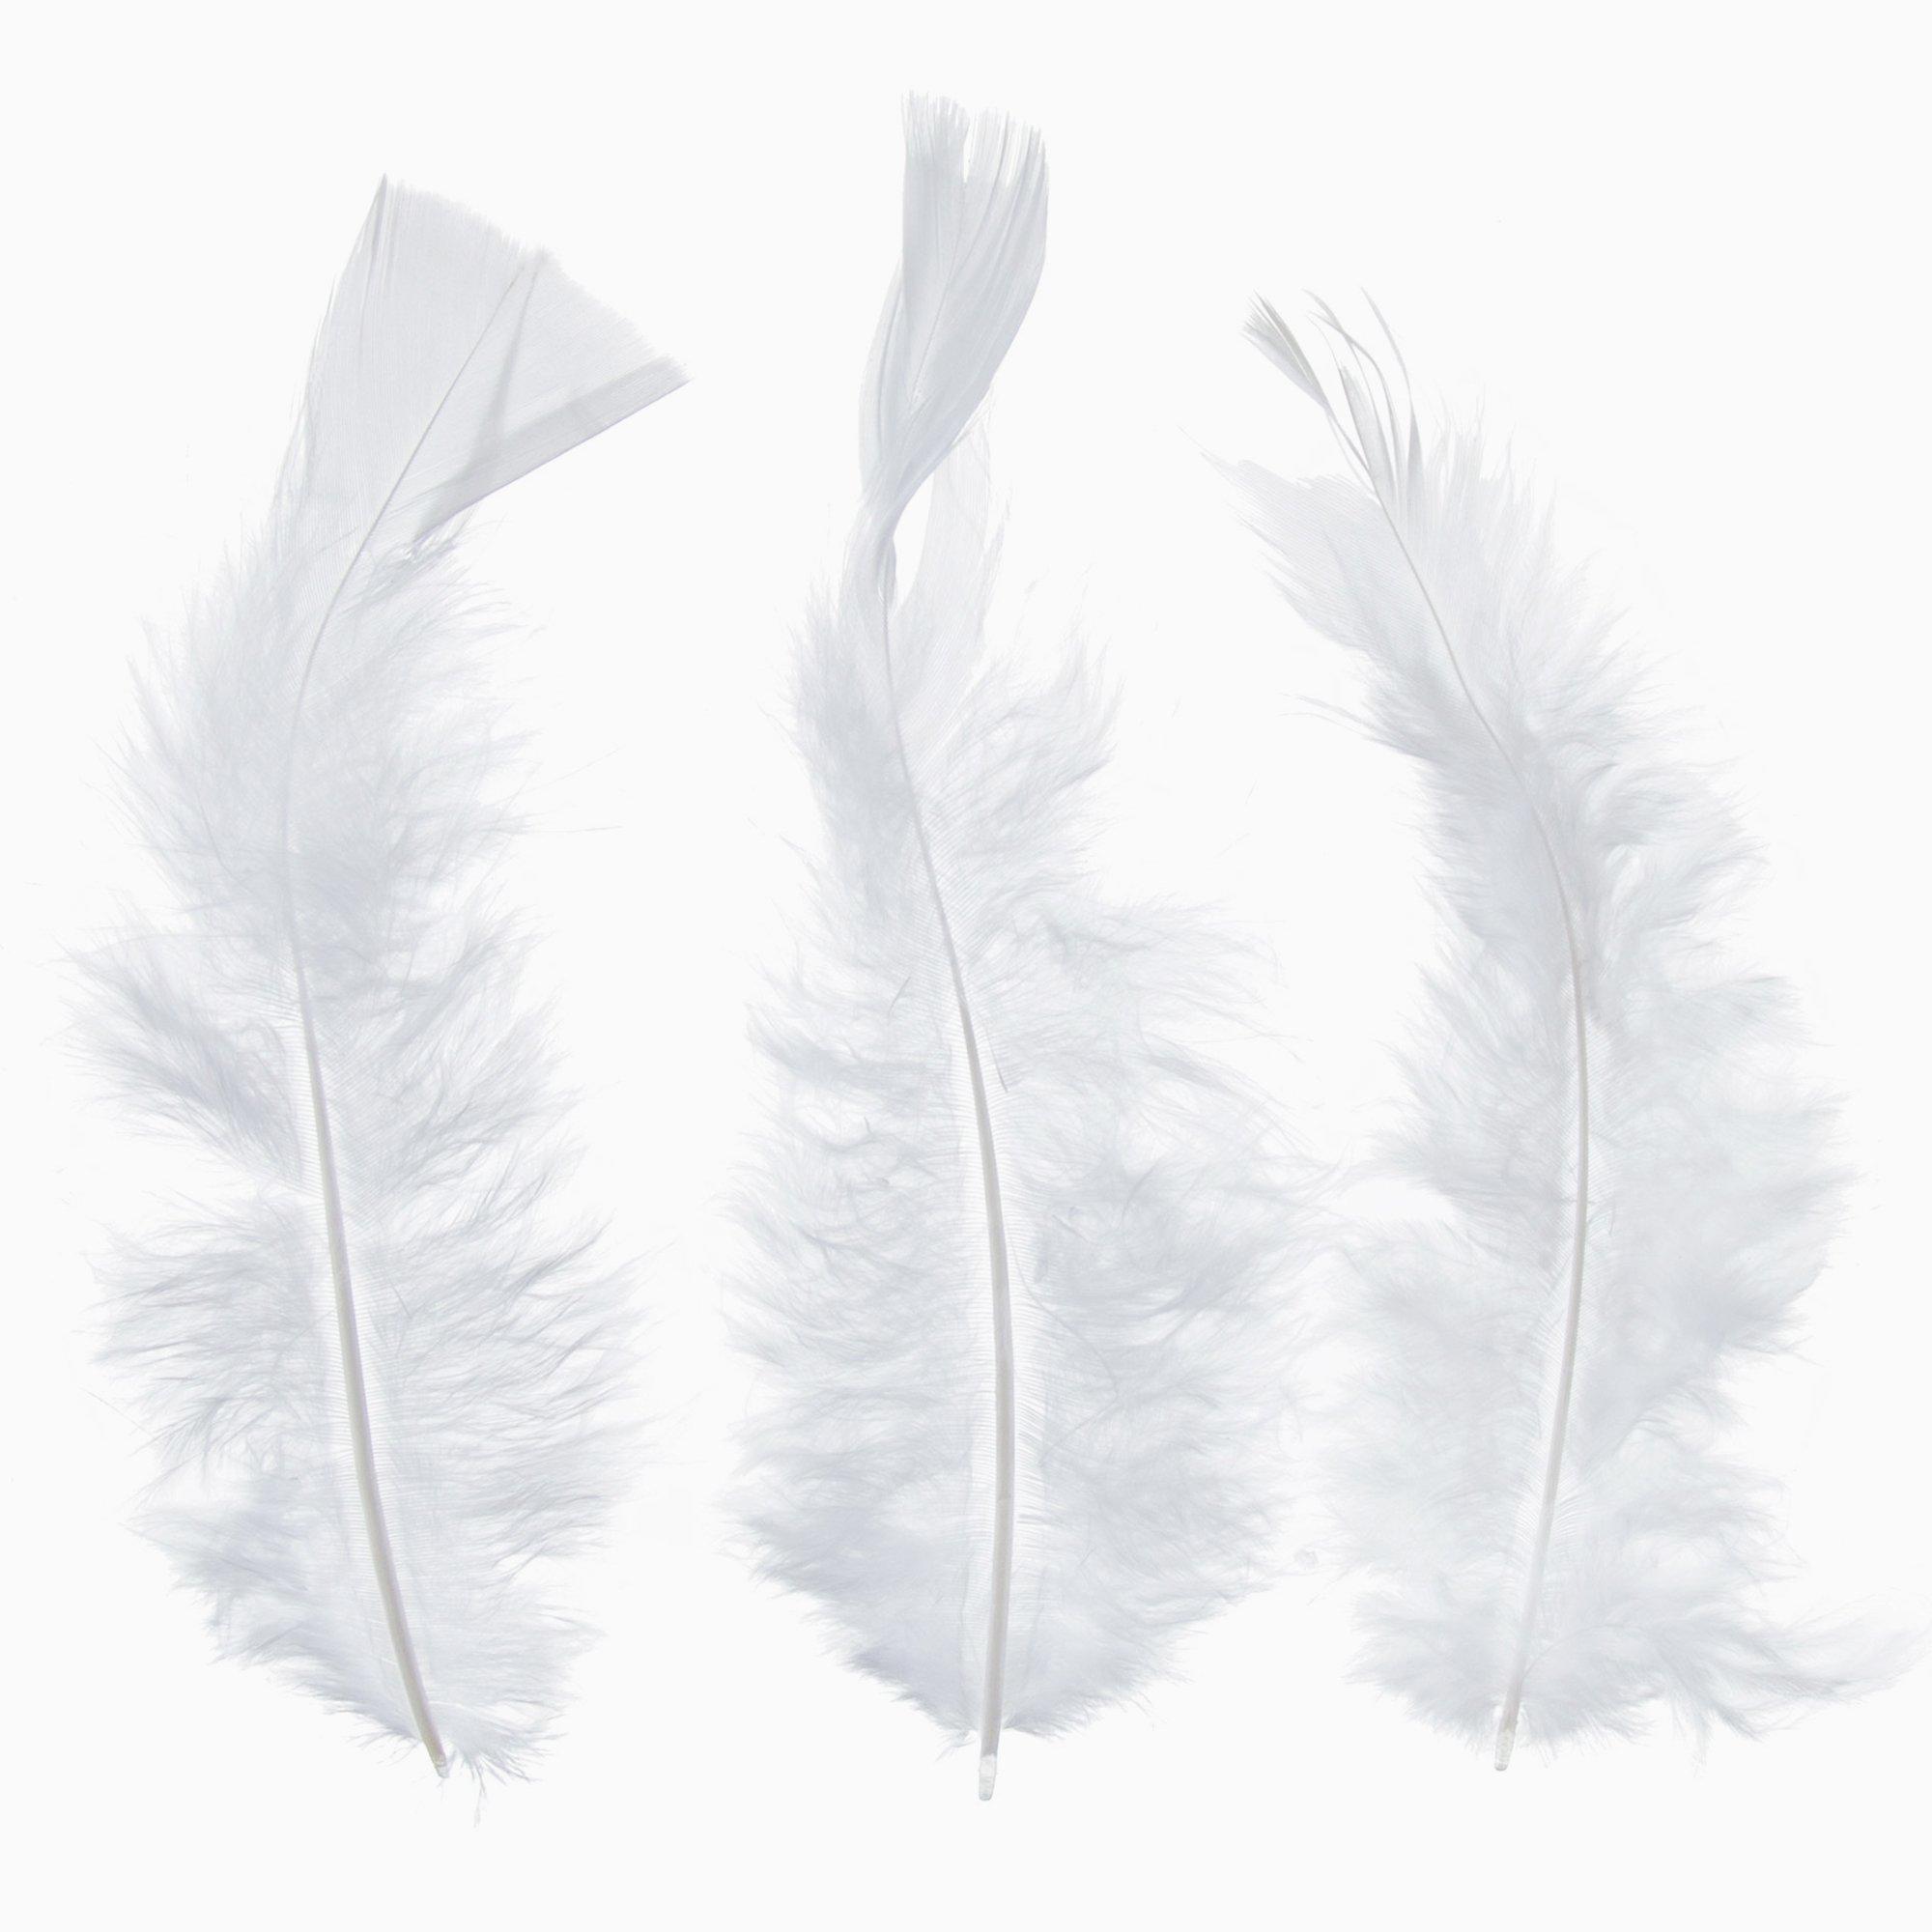 Hello Hobby White Feathers - Arts and Craft - 4.75 x 0.67 x 7.75 